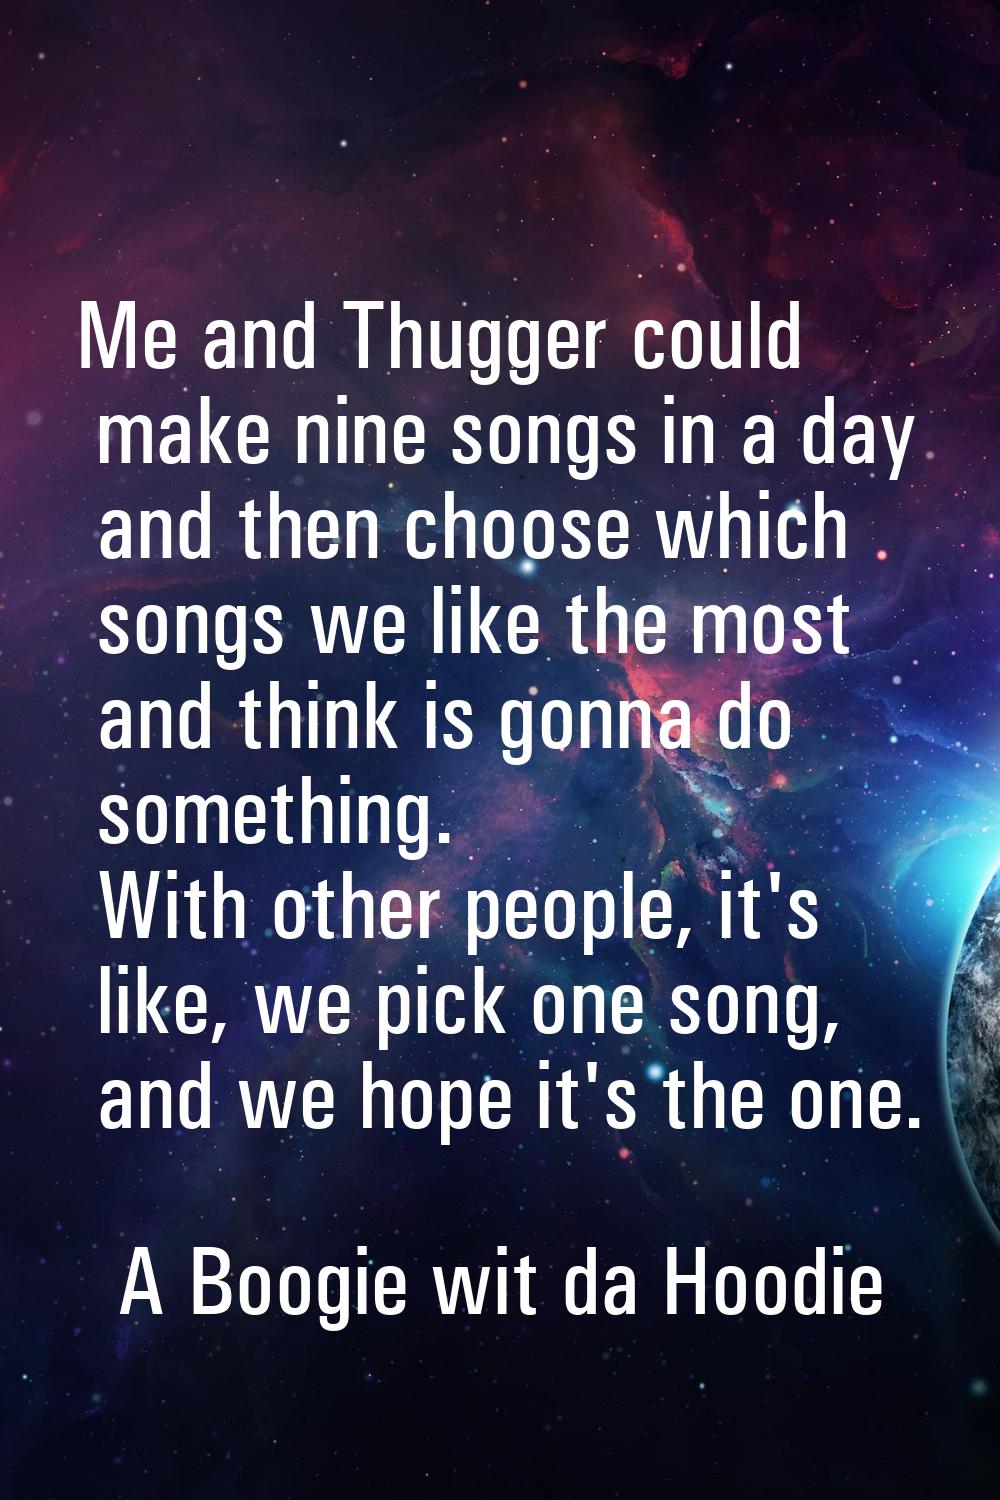 Me and Thugger could make nine songs in a day and then choose which songs we like the most and thin